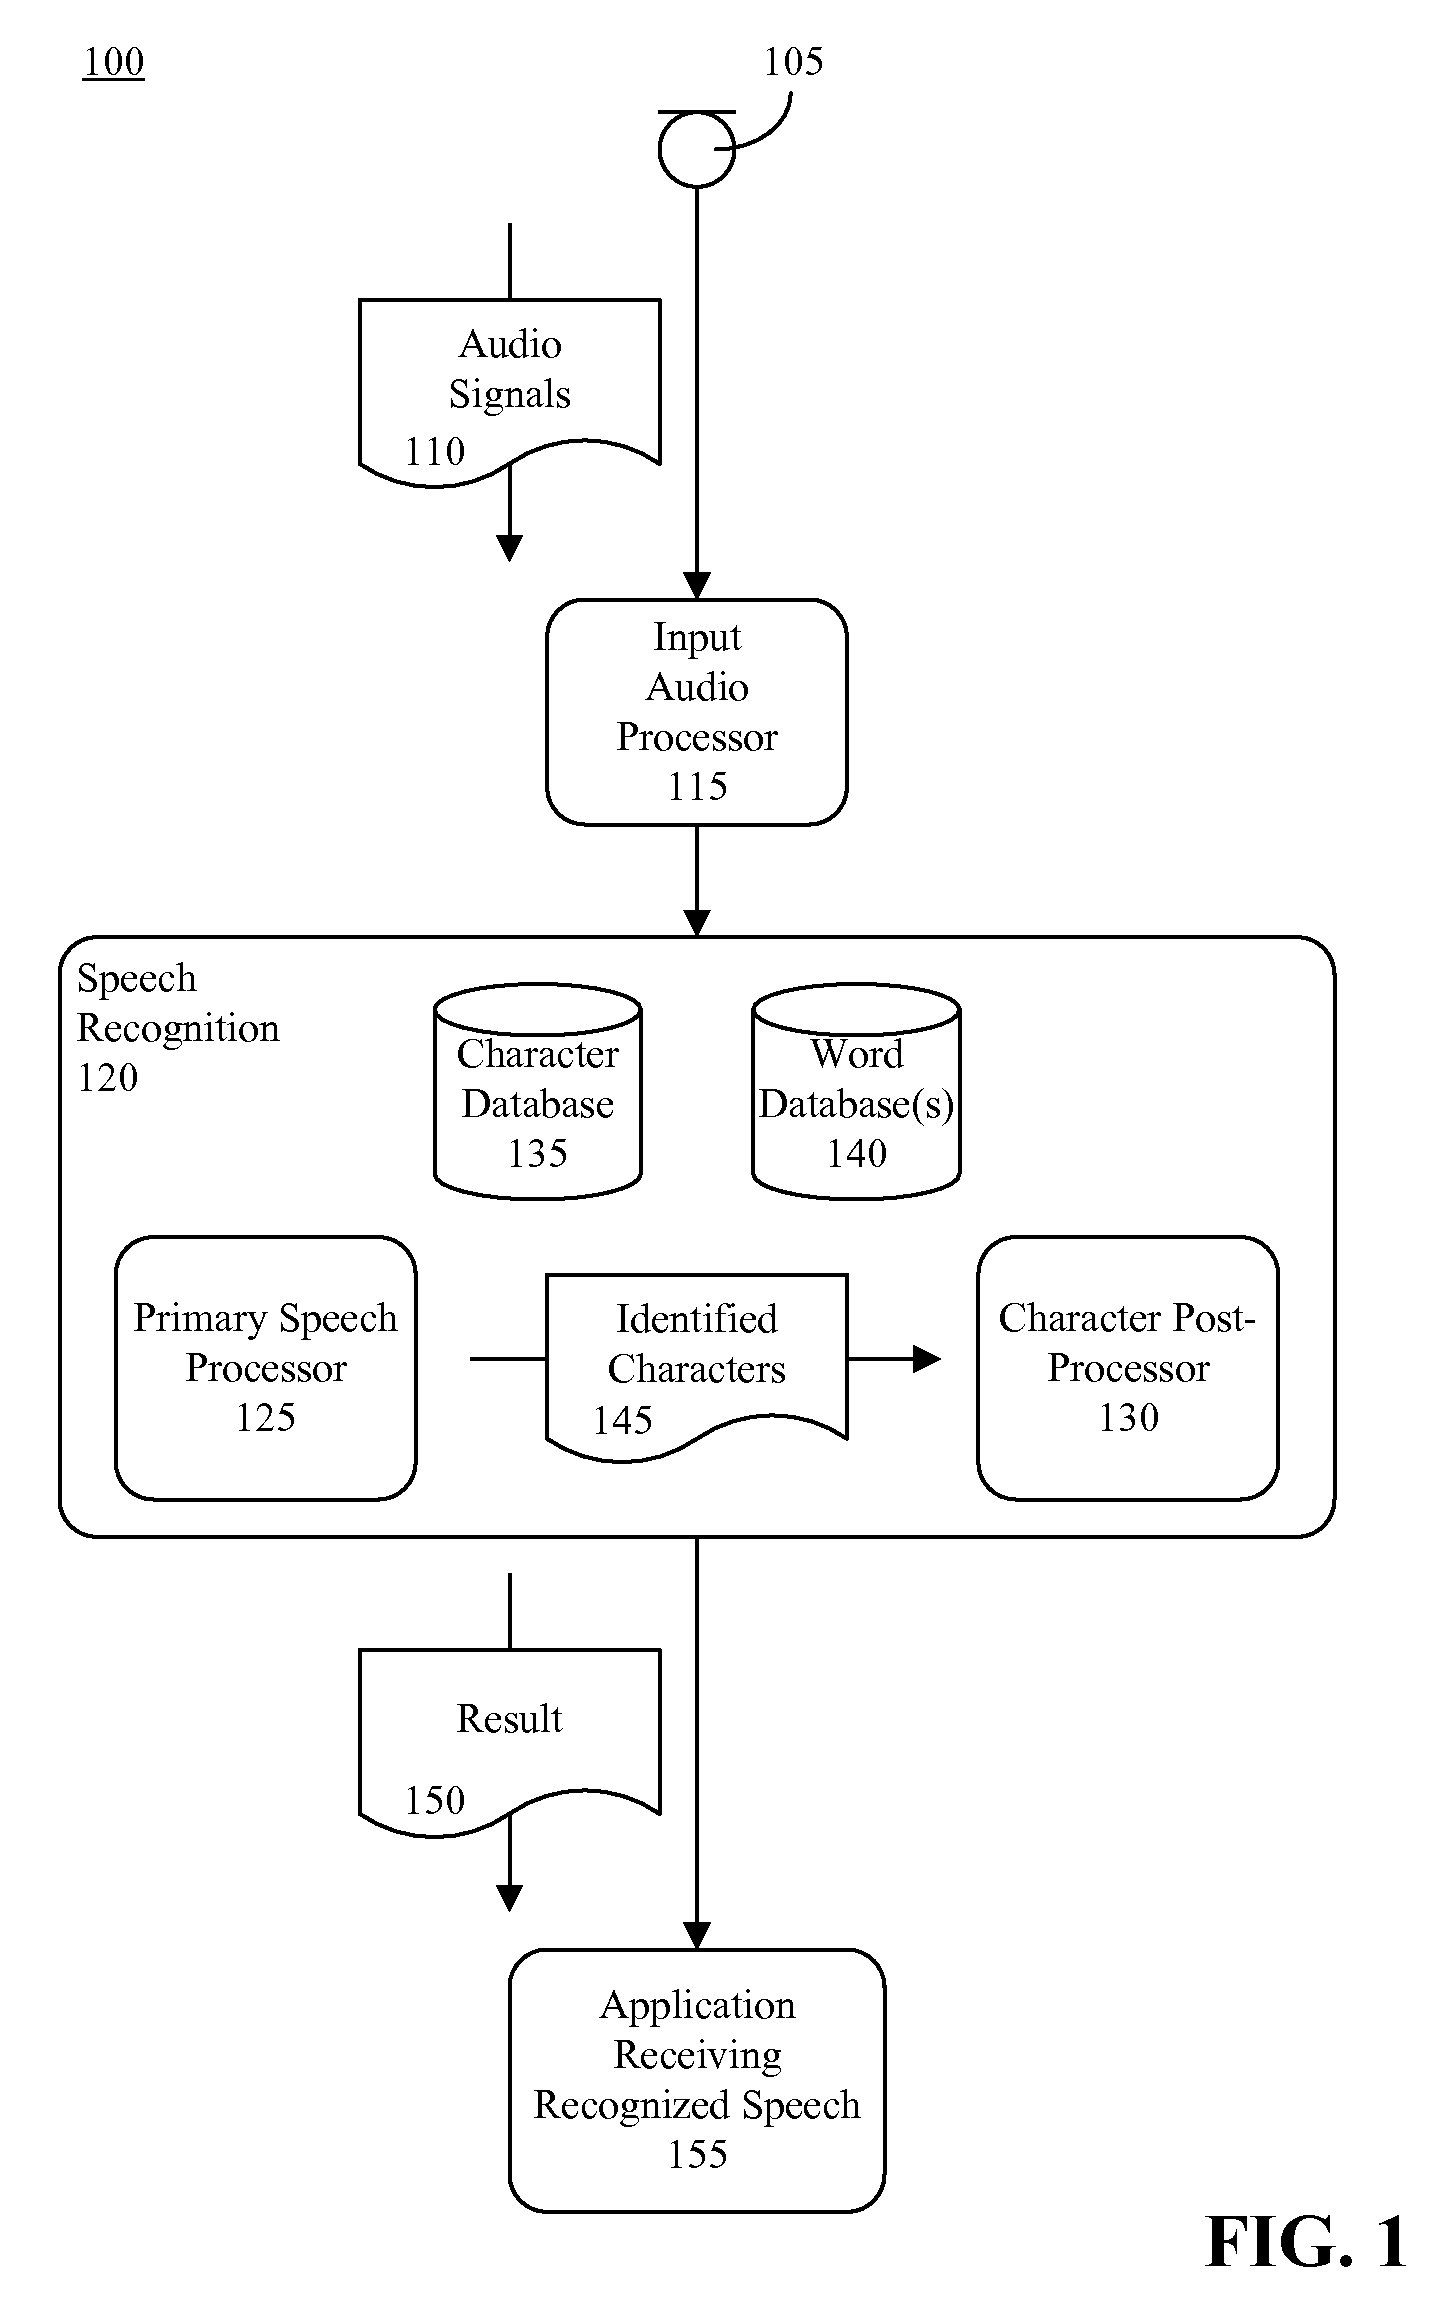 Speech recognition of character sequences